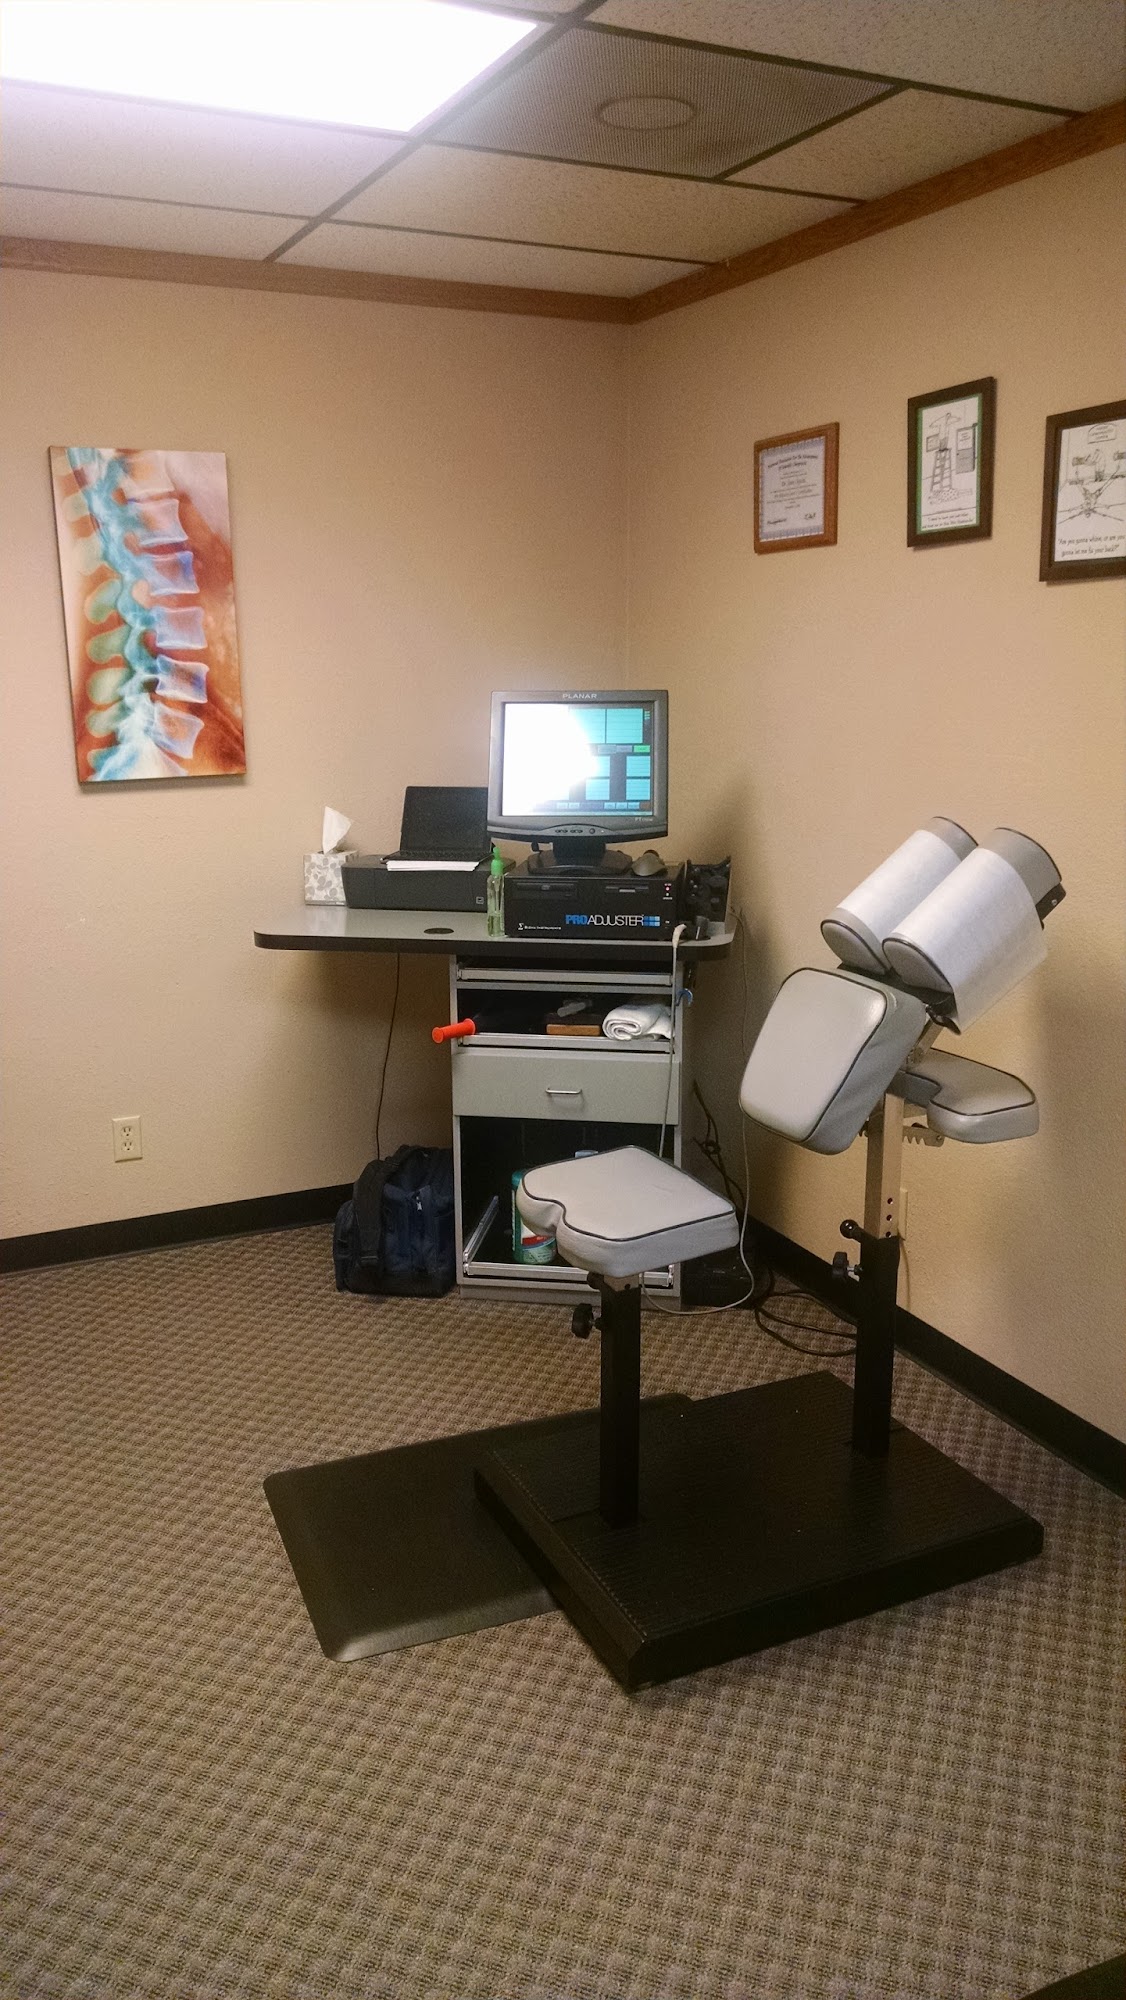 Oquist Family Chiropractic PC 401 S Main St, Lamar Colorado 81052